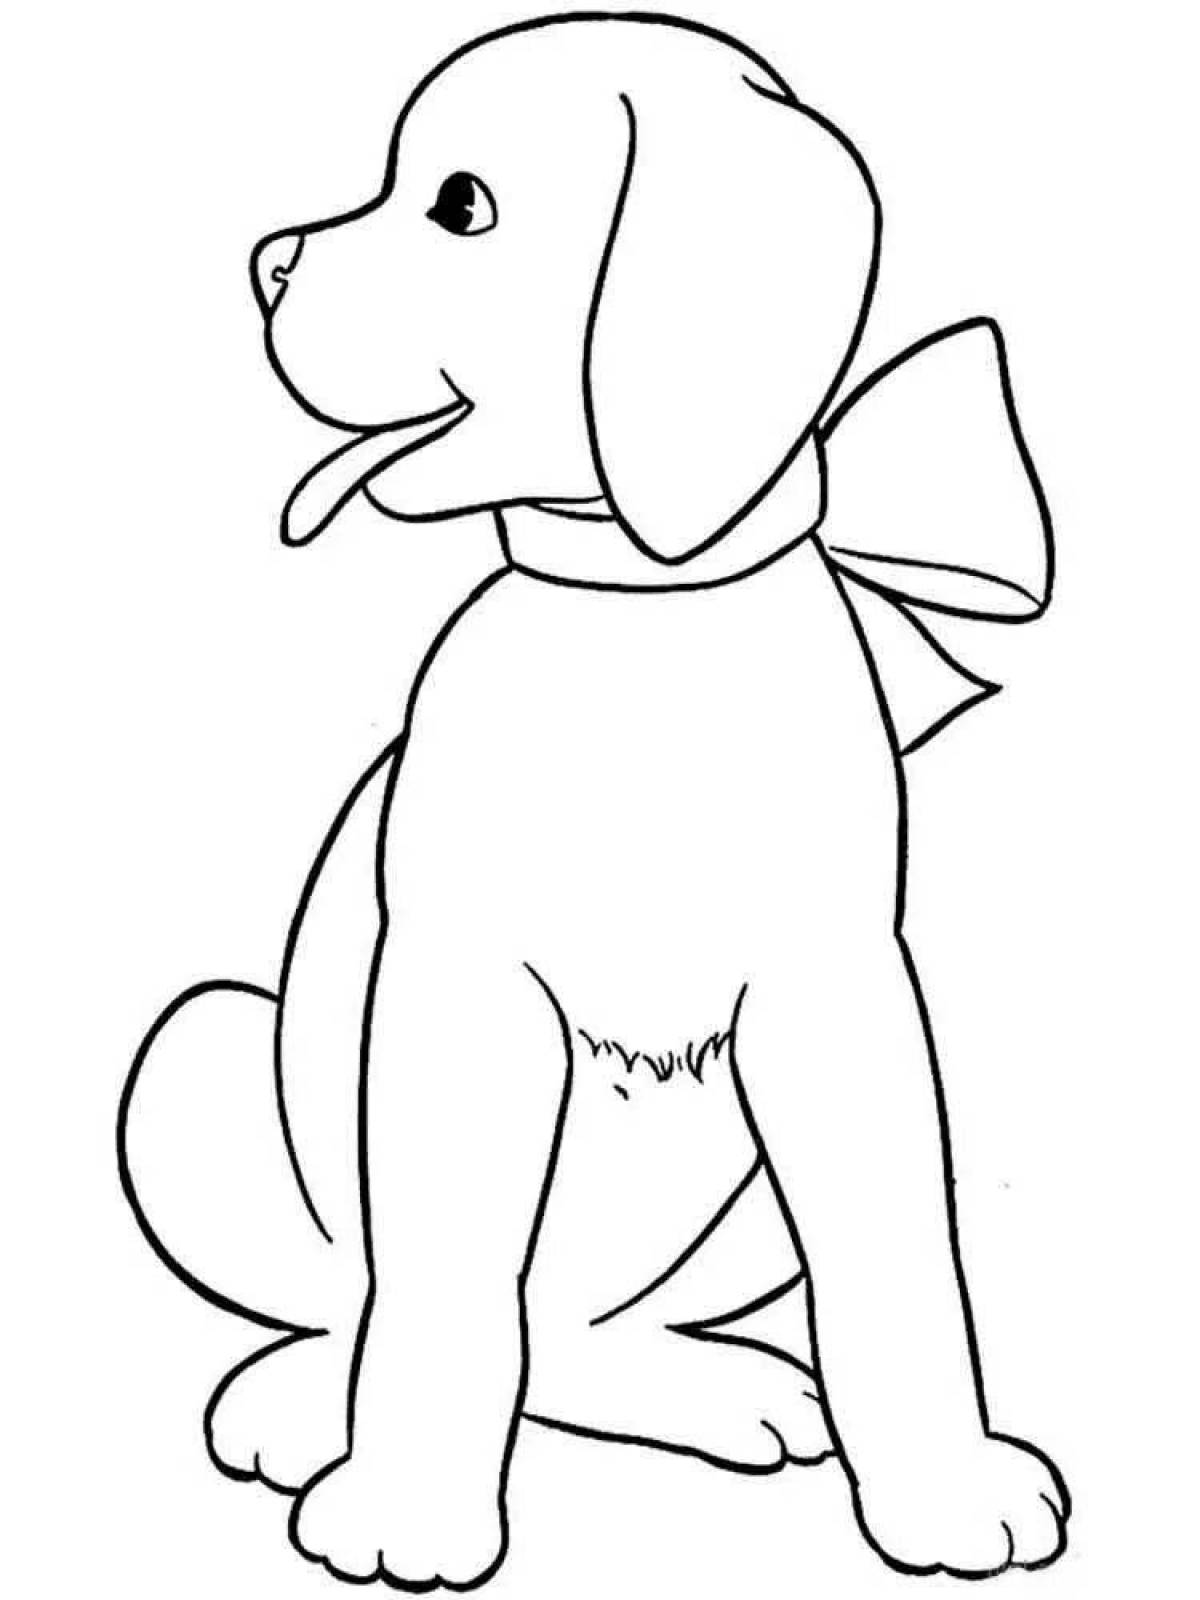 Snuggly my puppy coloring page